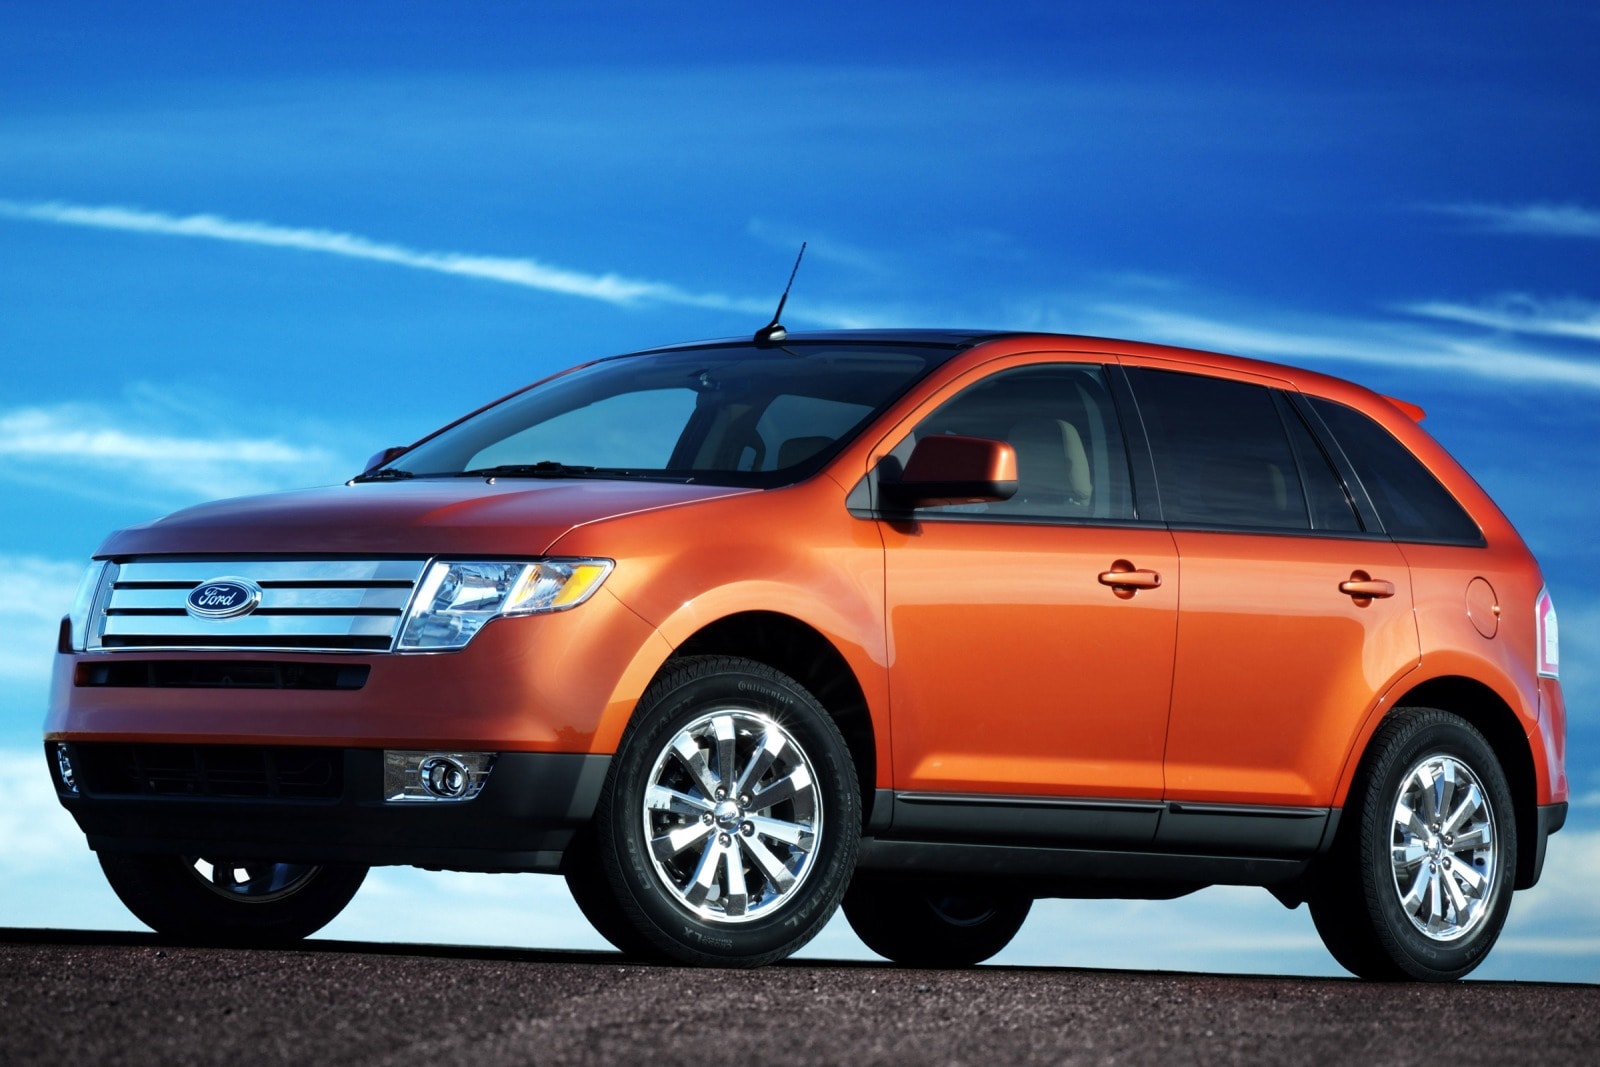 2007 Ford Edge Review & Ratings | Edmunds